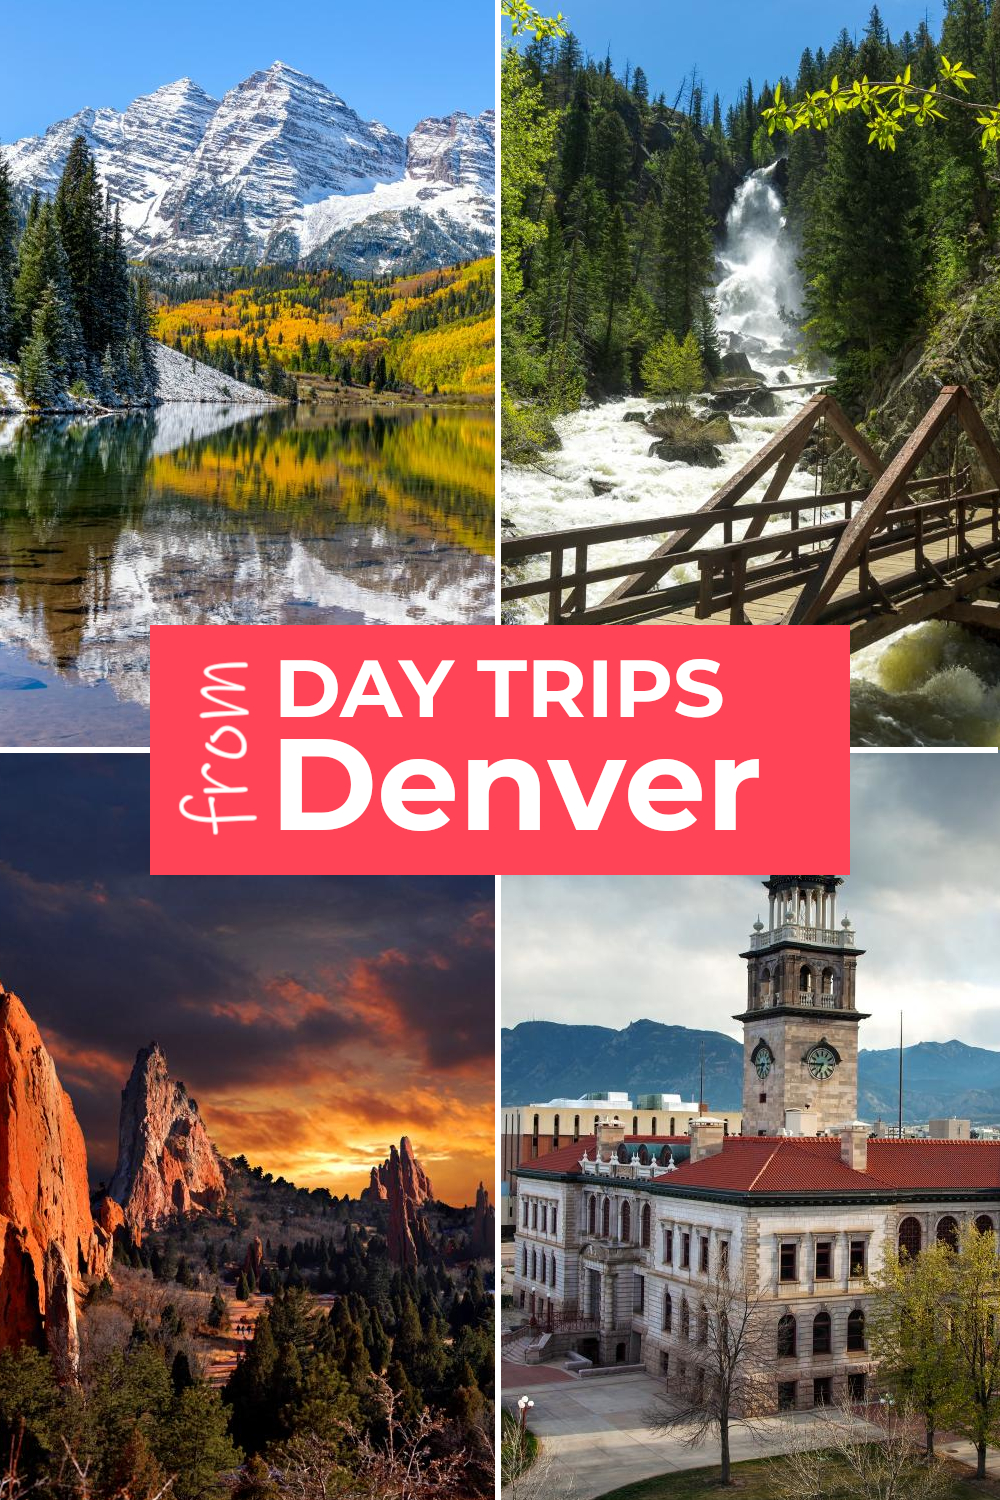 Best day trips from Denver including drives into the Rockies, historic mountain towns, National Parks and craft beer tours